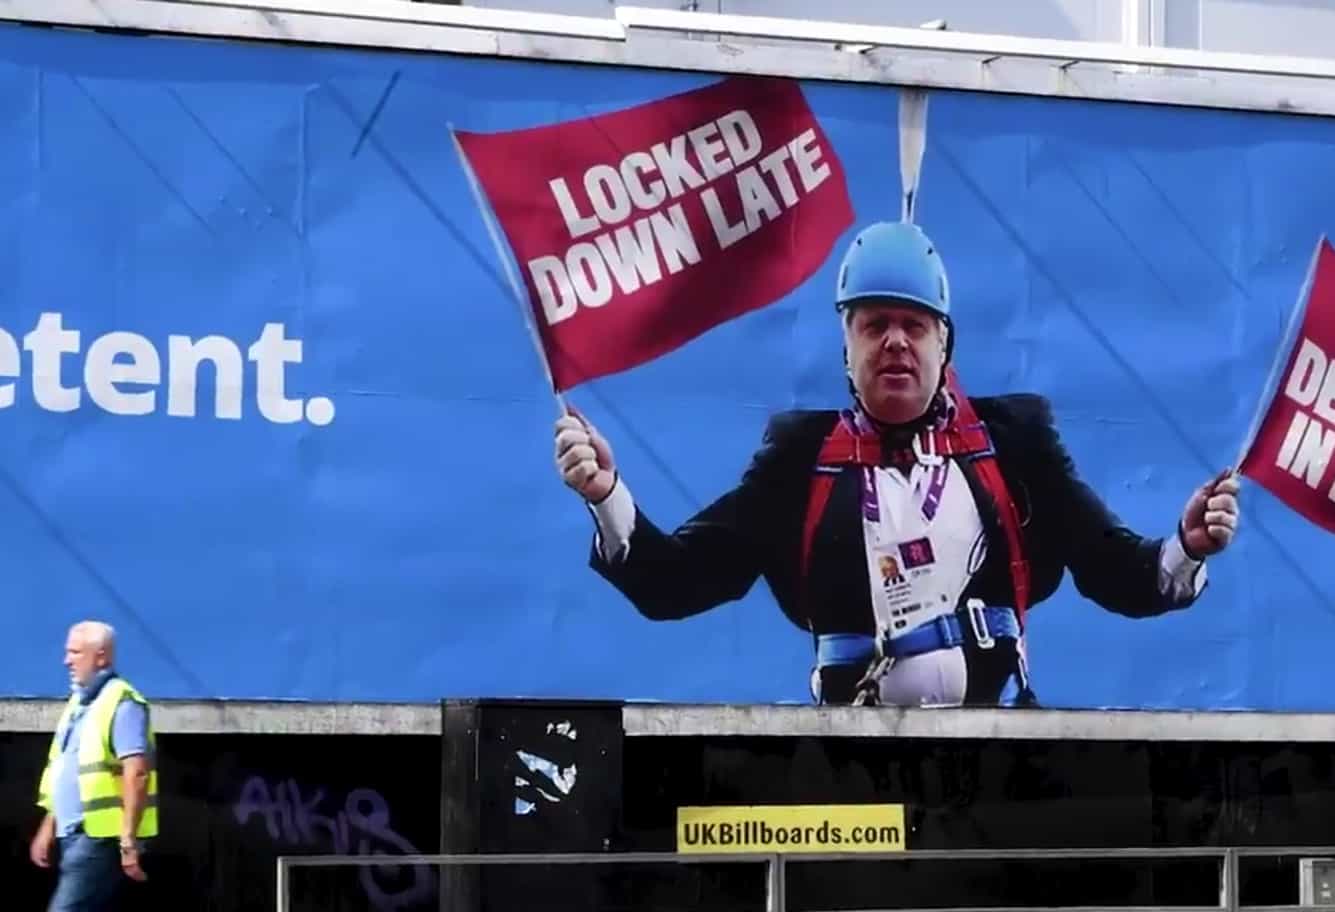 Led By Donkeys reveal their latest billboard – and it’s pretty brutal